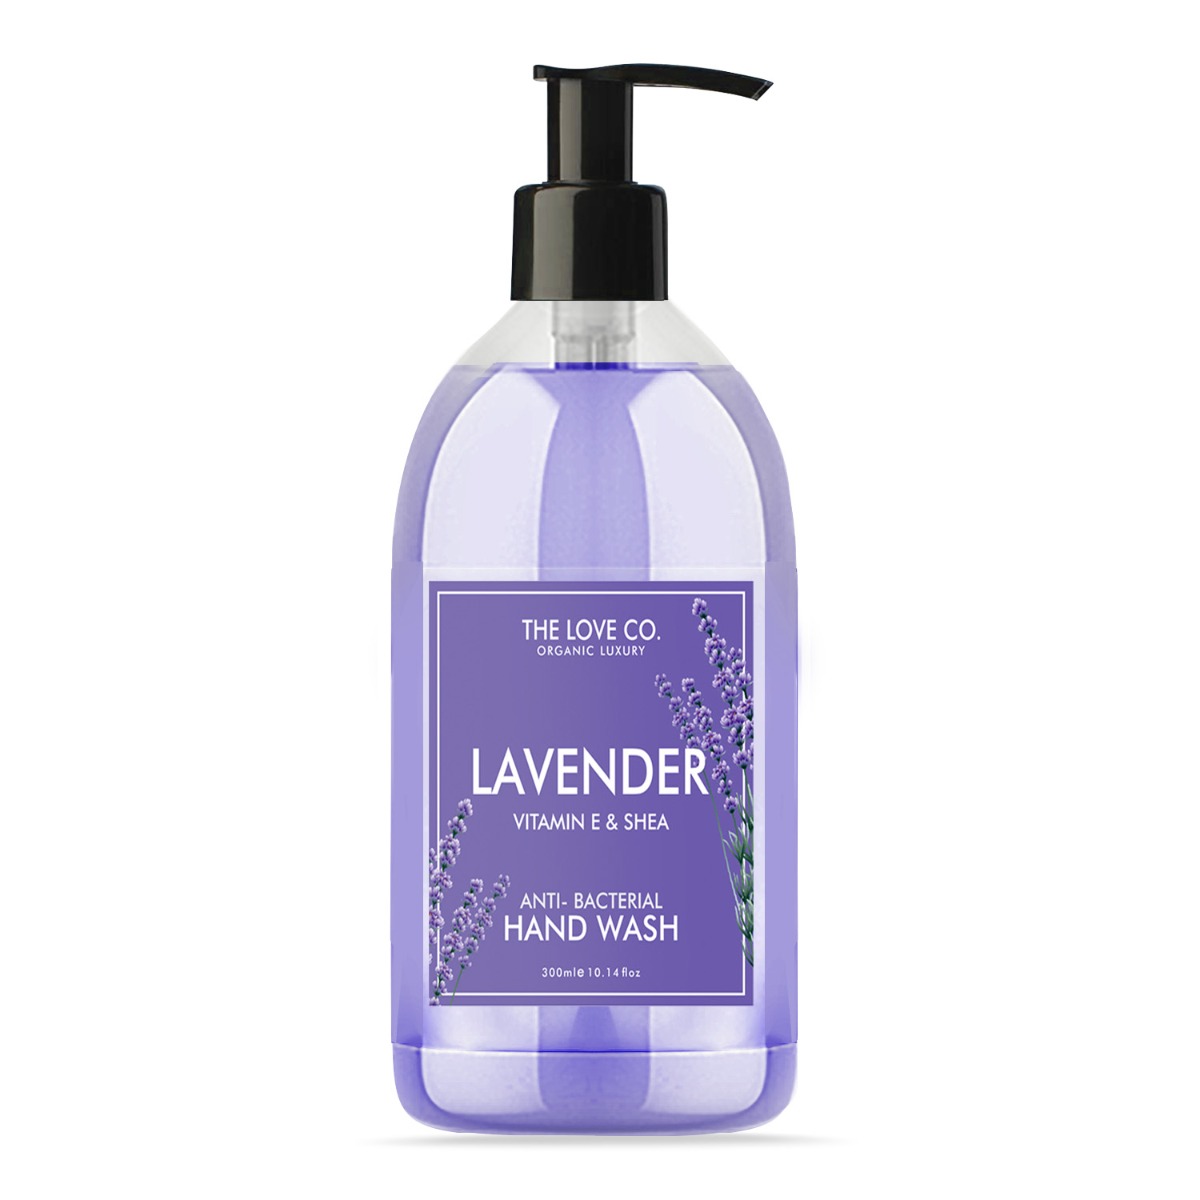 The Love Co. Lavender Anti-Bacterial Hand Wash, 300ml